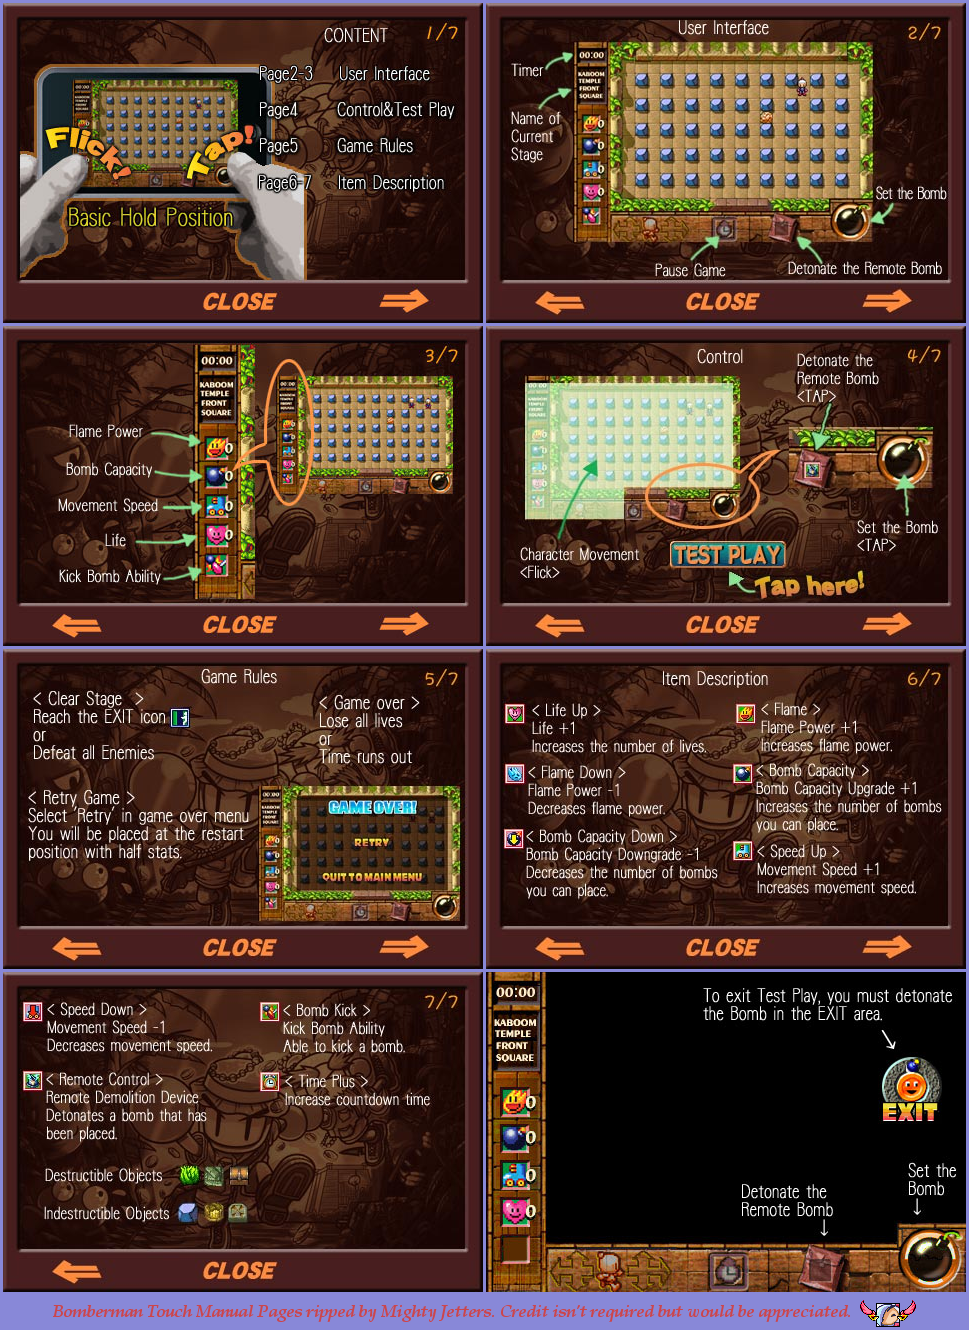 Bomberman Touch: The Legend of Mystic Bomb - Manual Pages